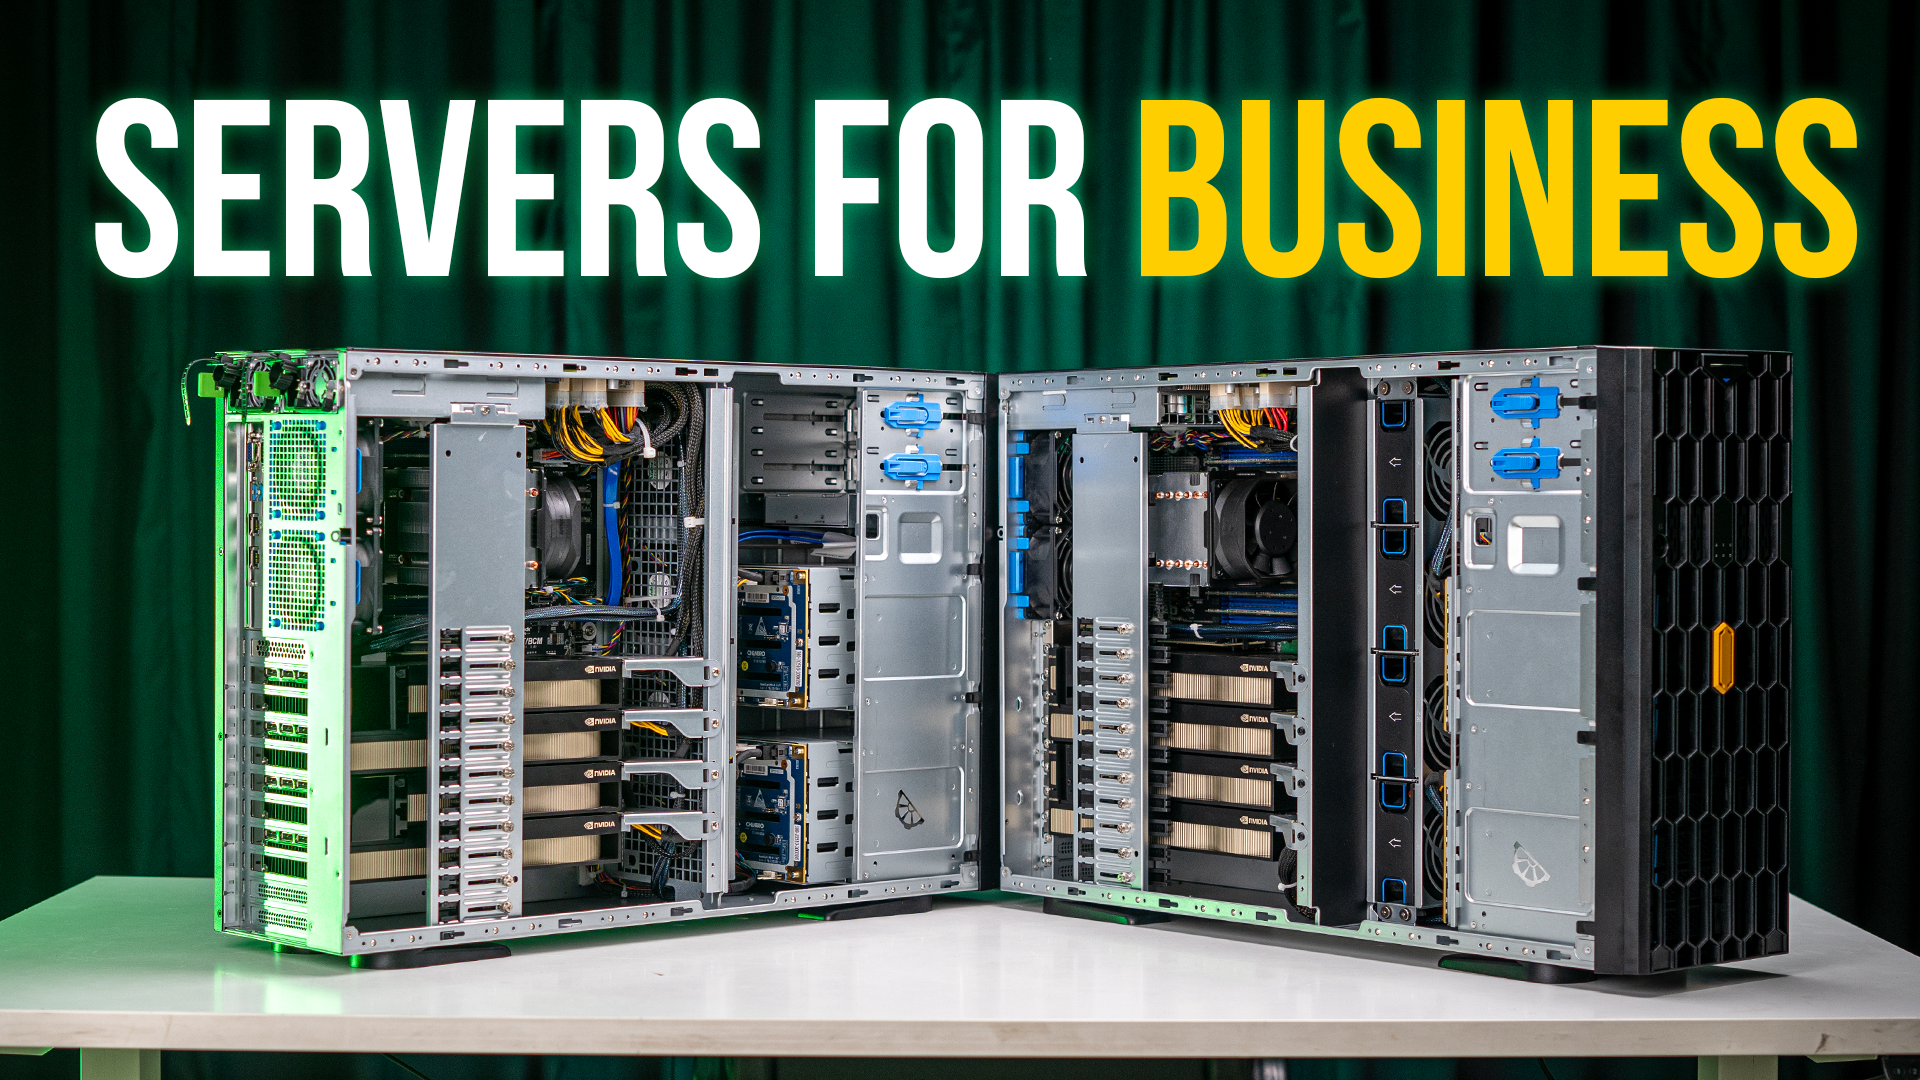 5 Reasons Why Every Business Should Have a Server